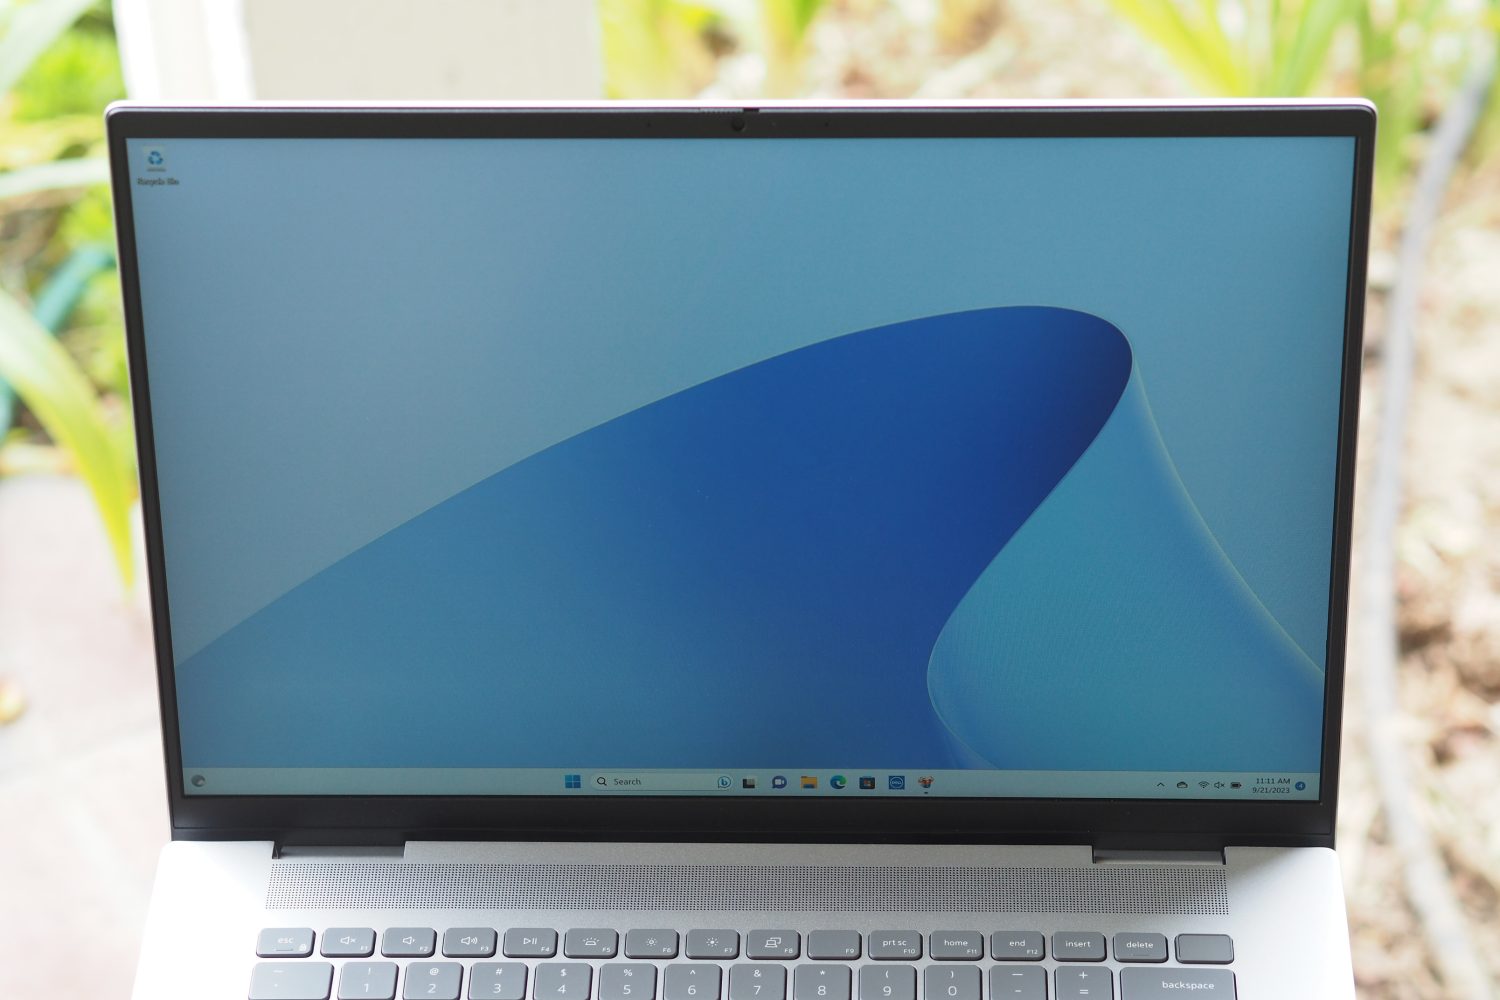 Dell Inspiron 16 Plus laptop review: A sleeper powerhouse